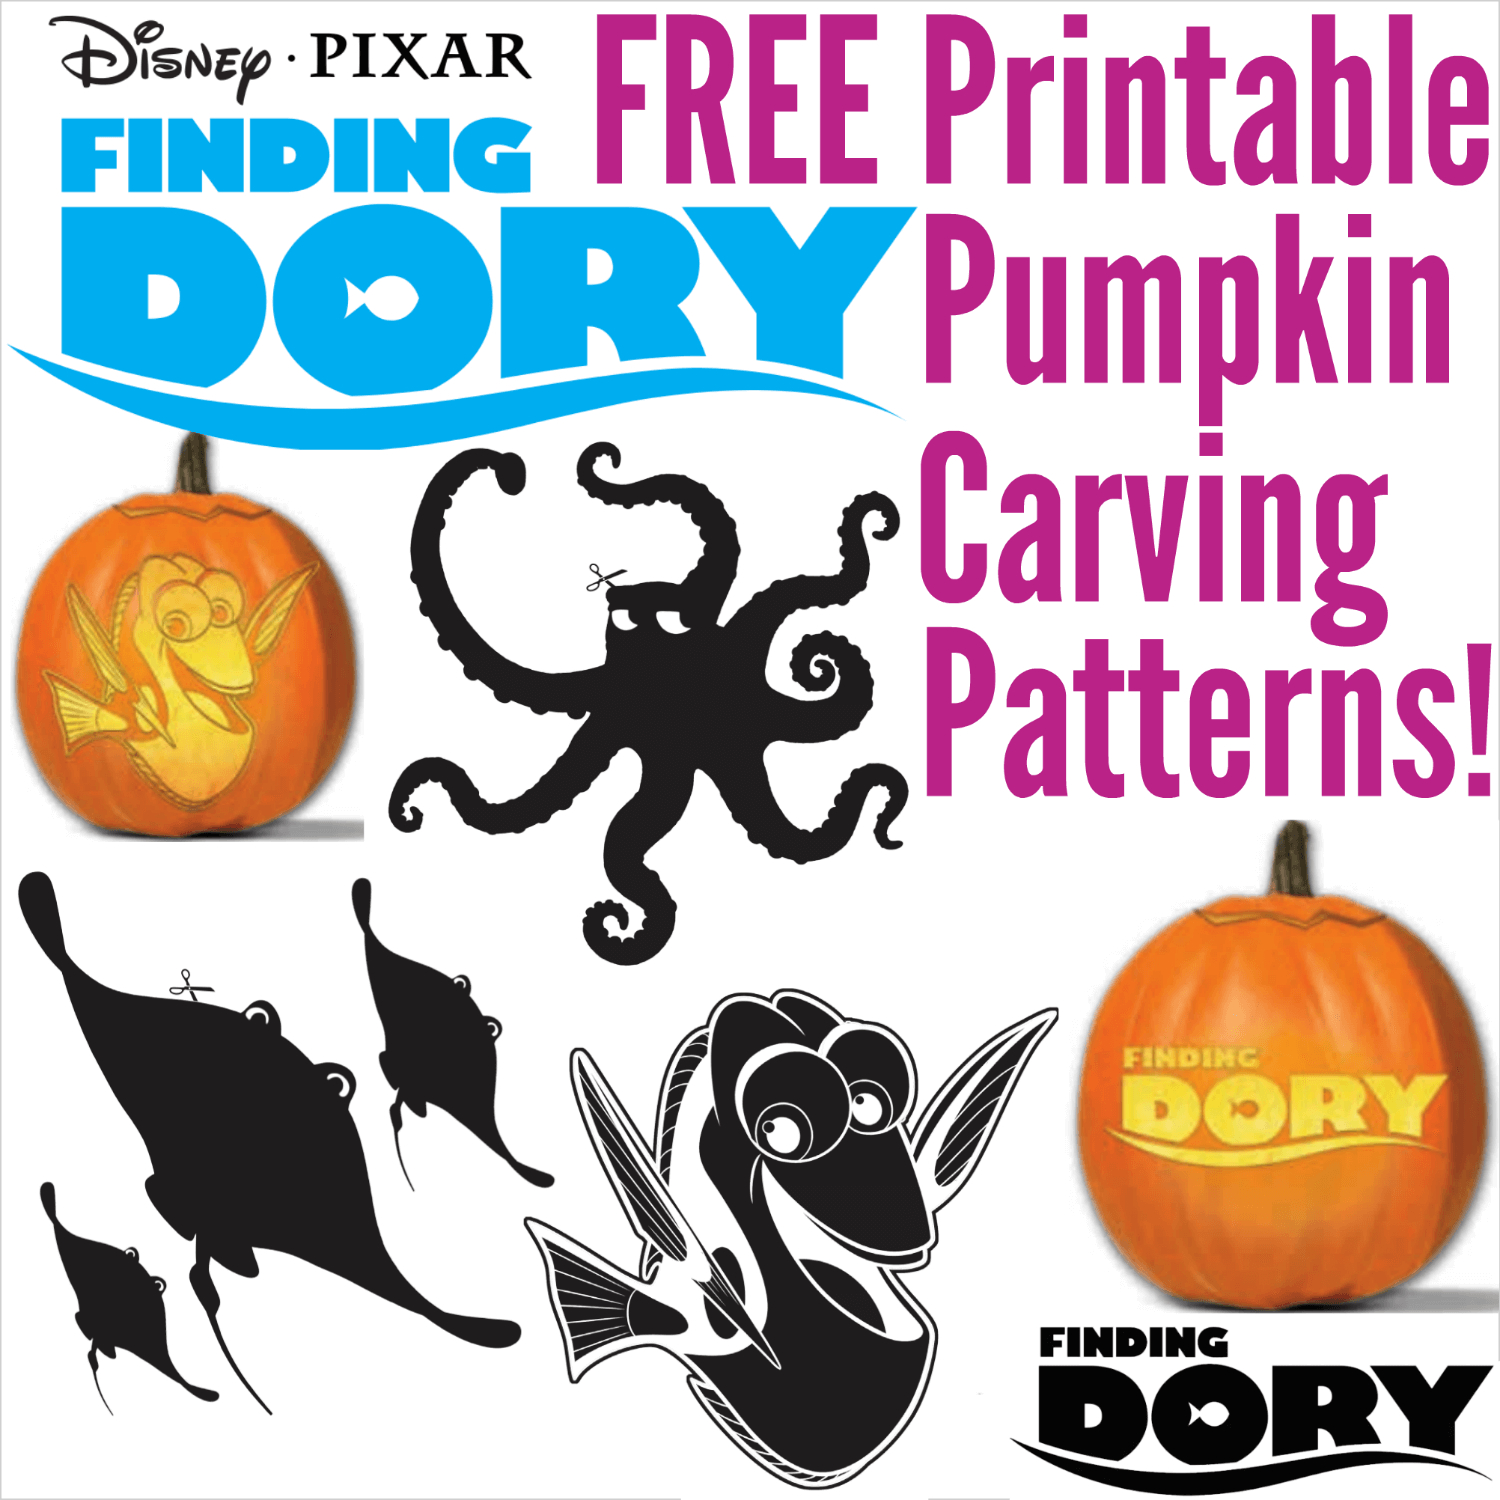 Free Finding Dory Pumpkin Carving Patterns To Print! - Pumpkin Carving Patterns Free Printable